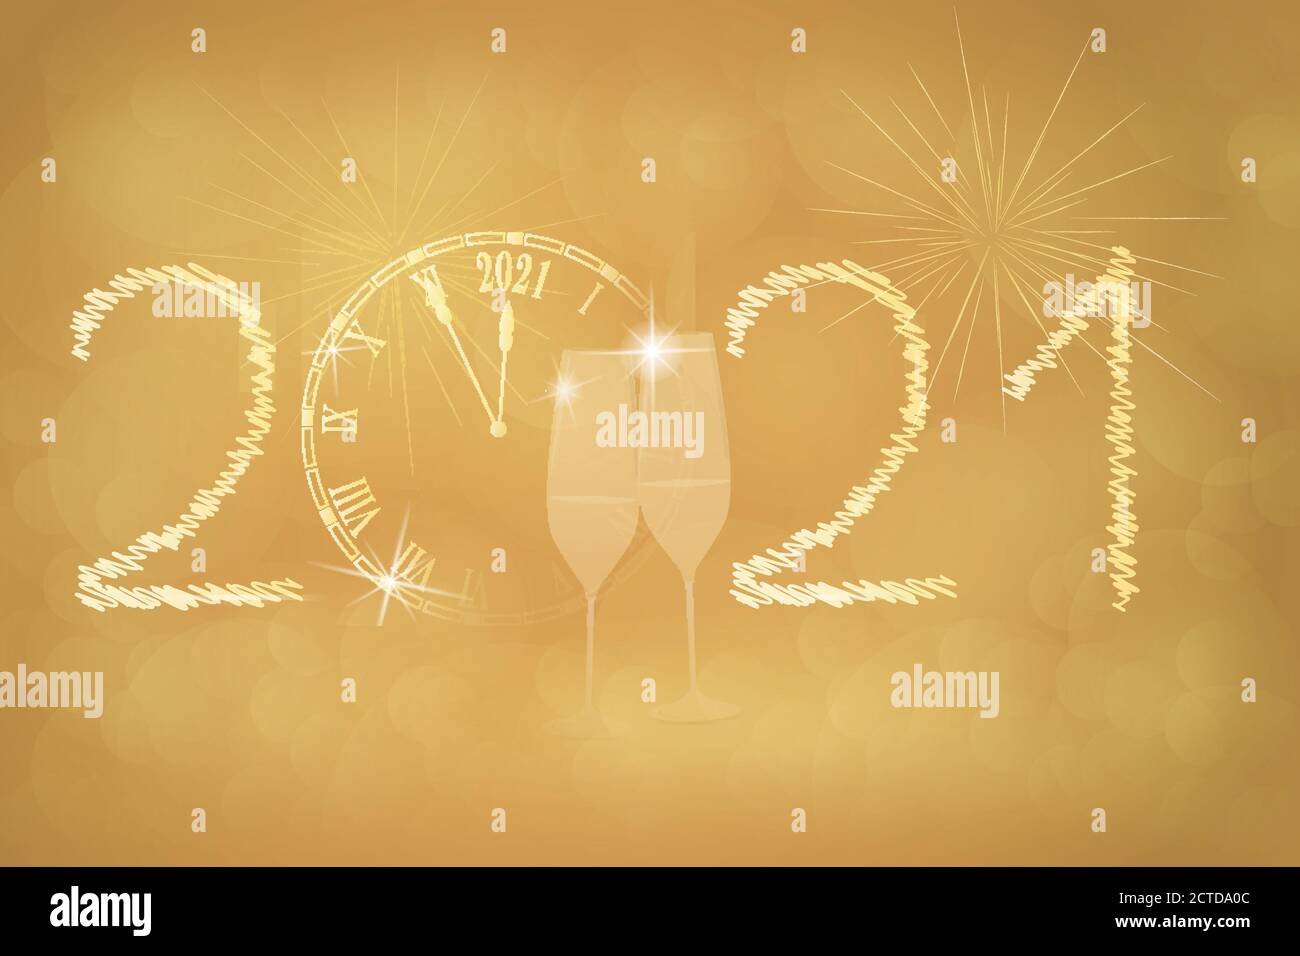 Happy New Year - 2022. Two glasses with big retro clock and fireworks in golden colors. Stock Vector